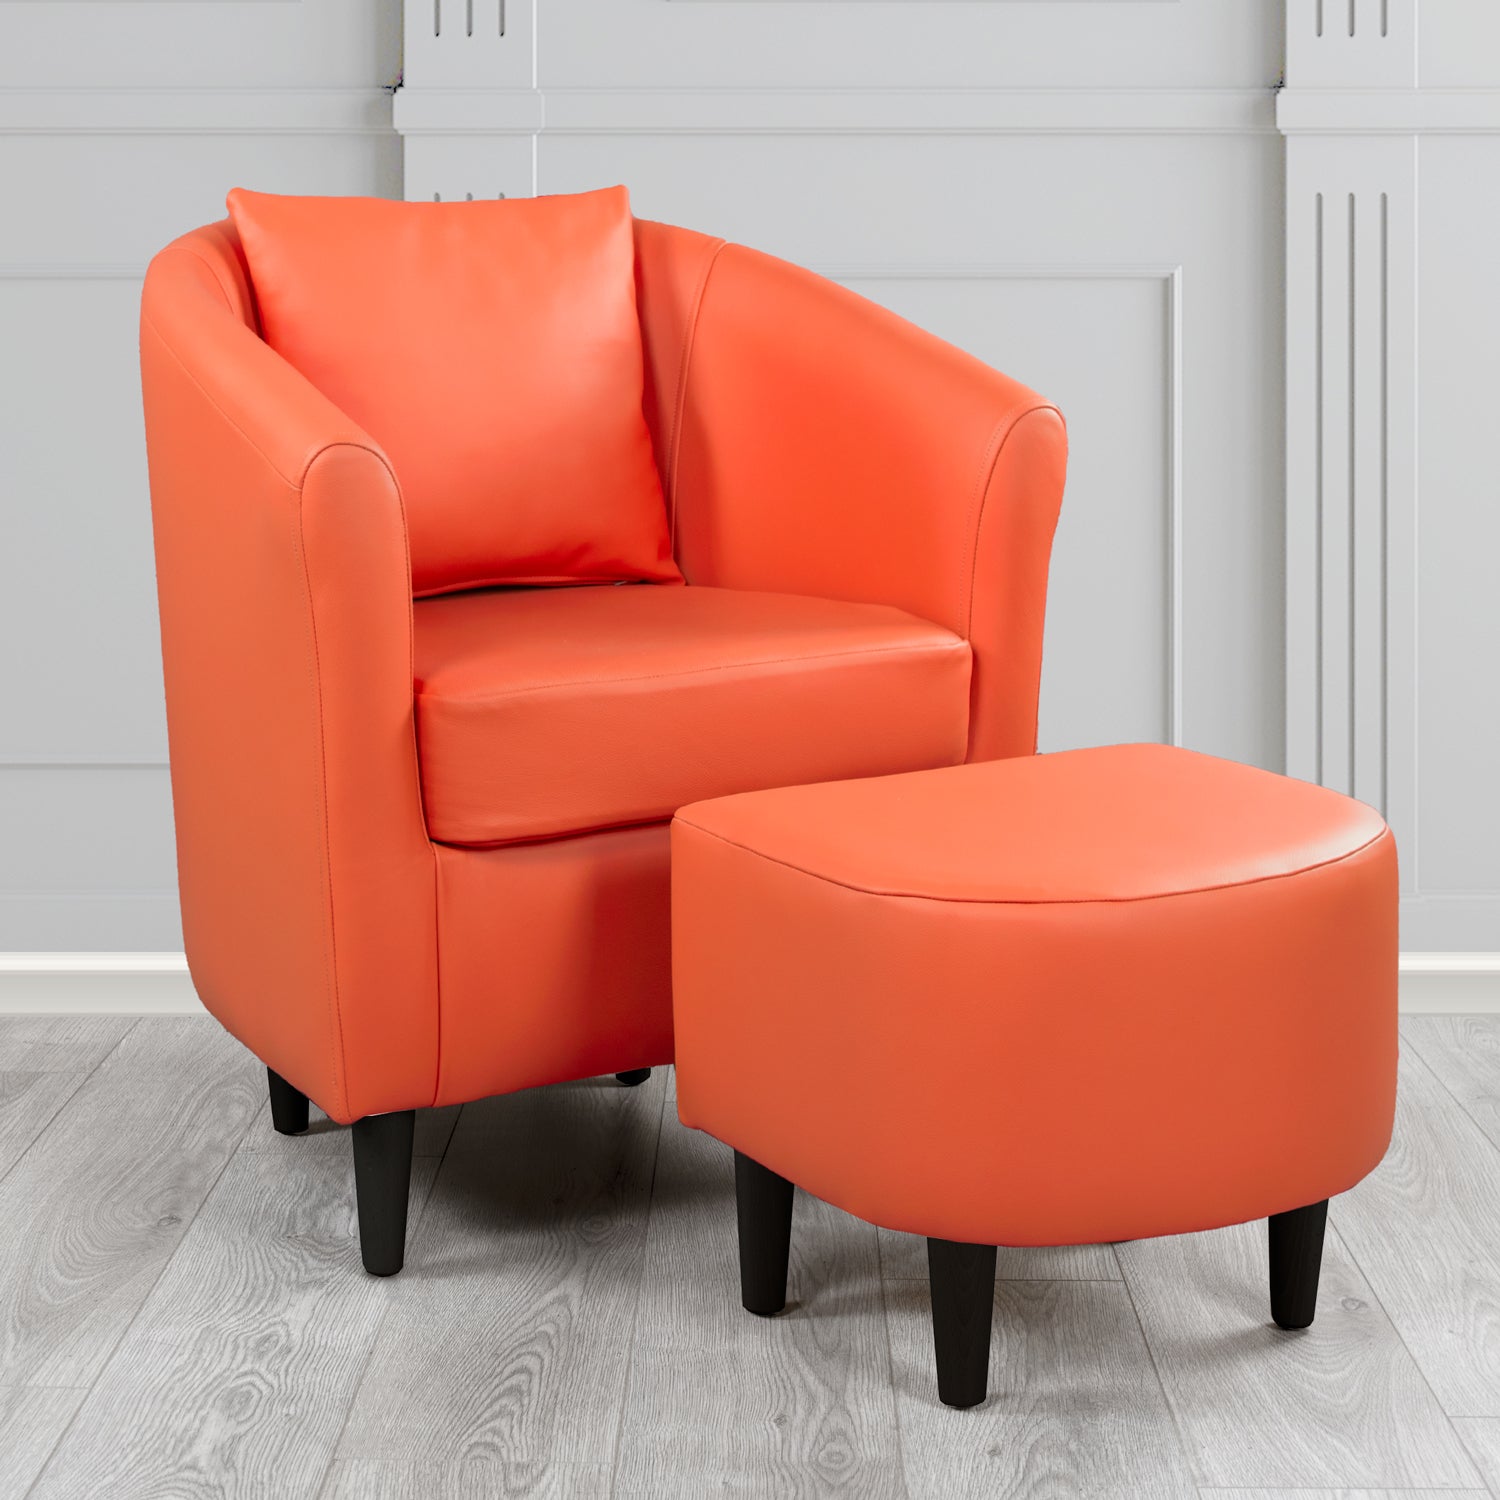 St Tropez Shelly Firestone Crib 5 Genuine Leather Tub Chair & Footstool Set With Scatter Cushion (6619493105706)